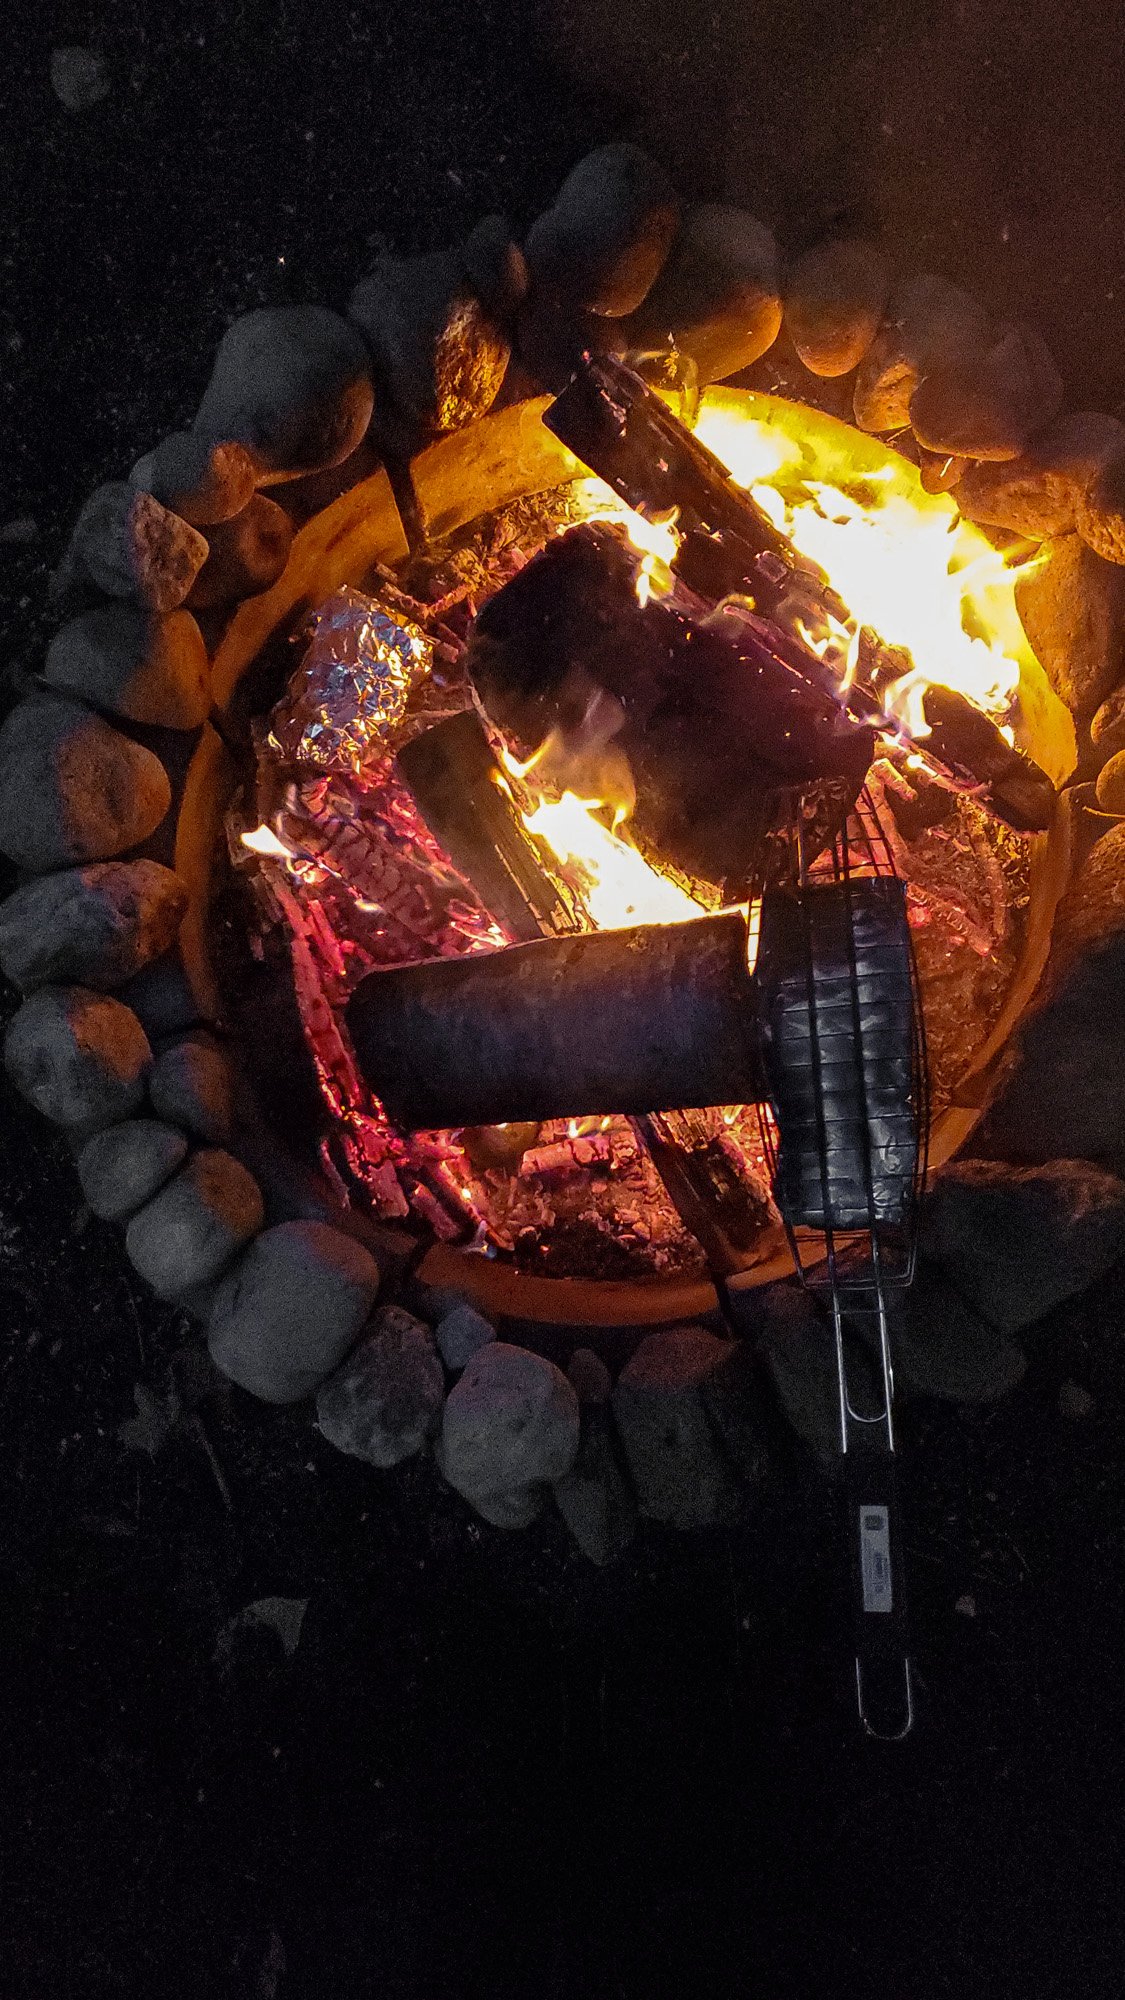 quebec-trip-trailer-days-dinner-cooking-fish-on-the-campfire.jpg